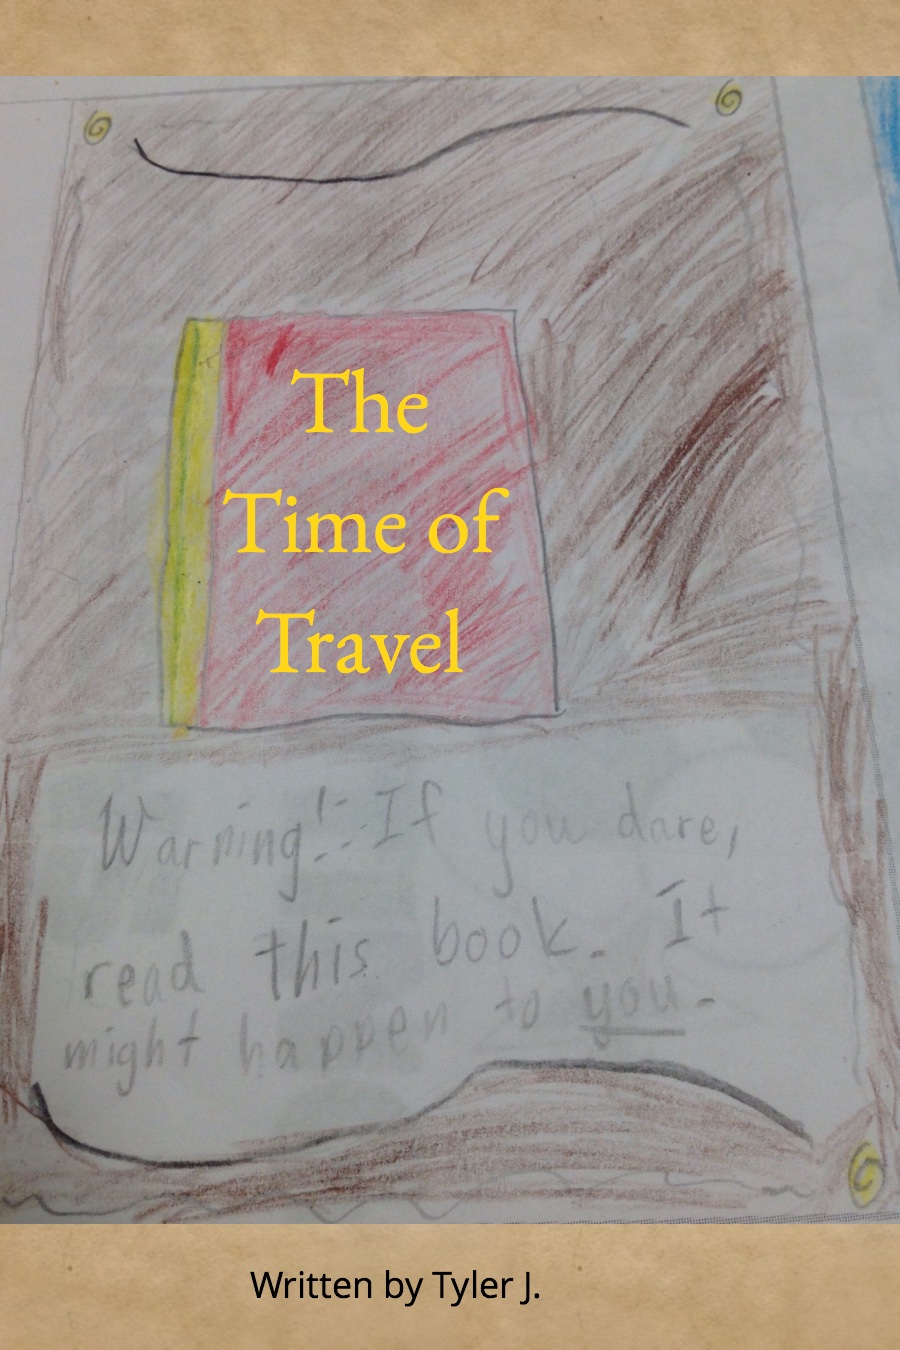 The Book of Travel by Tyler J